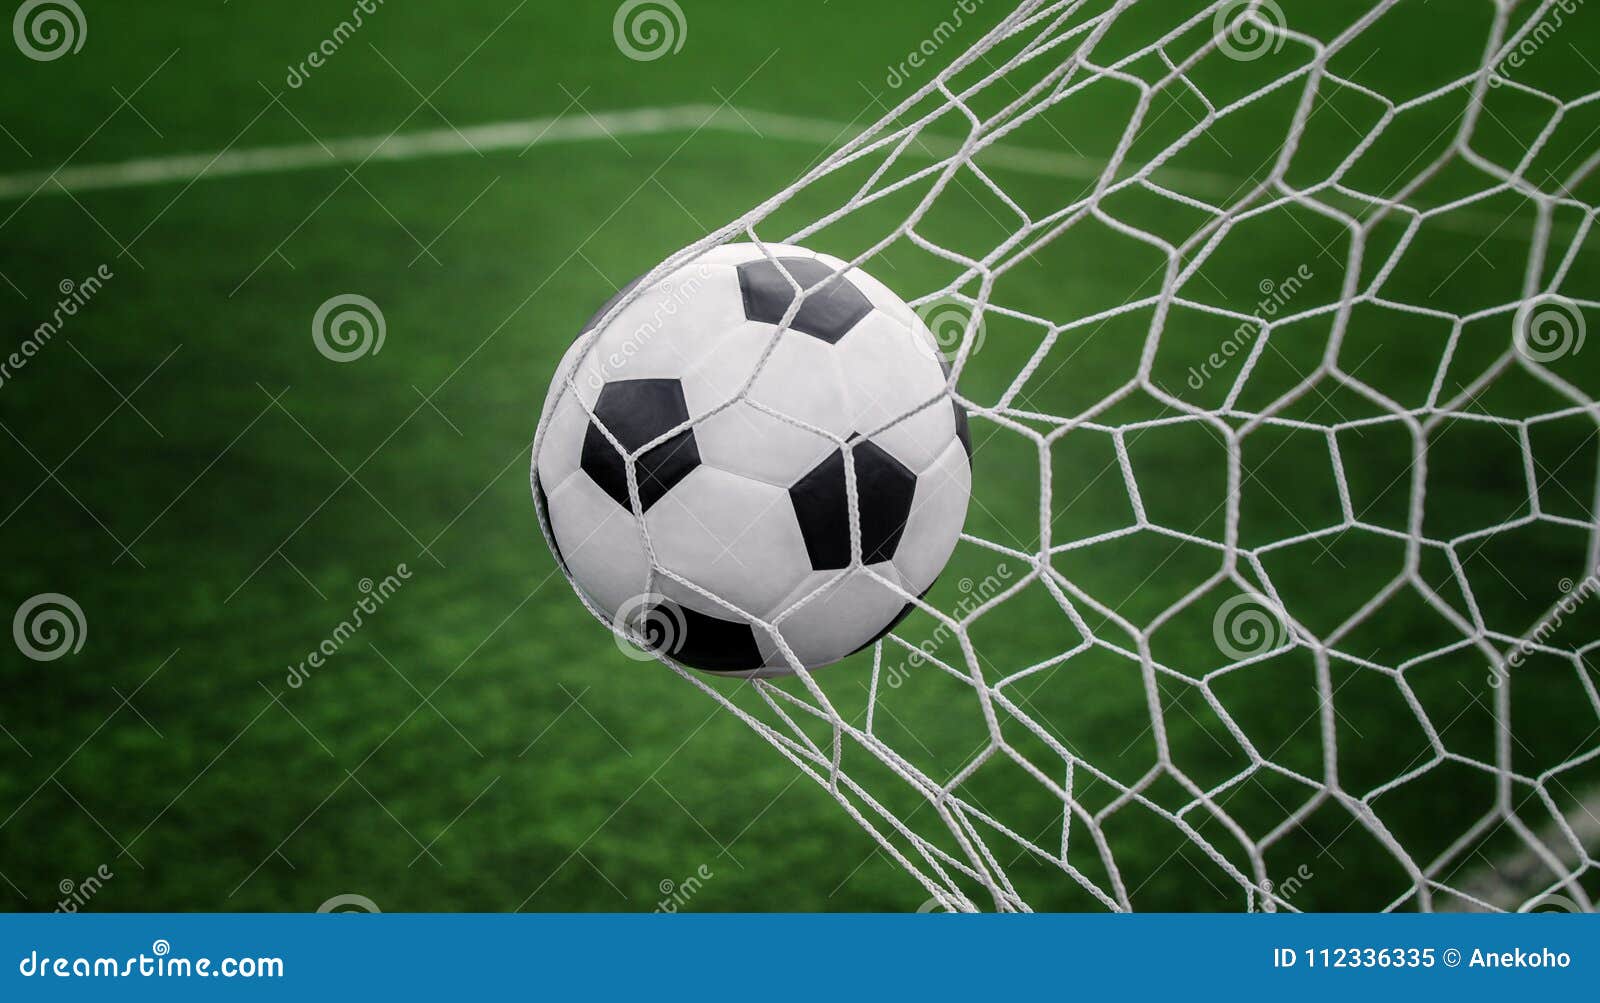 soccer ball on goal with net and green background